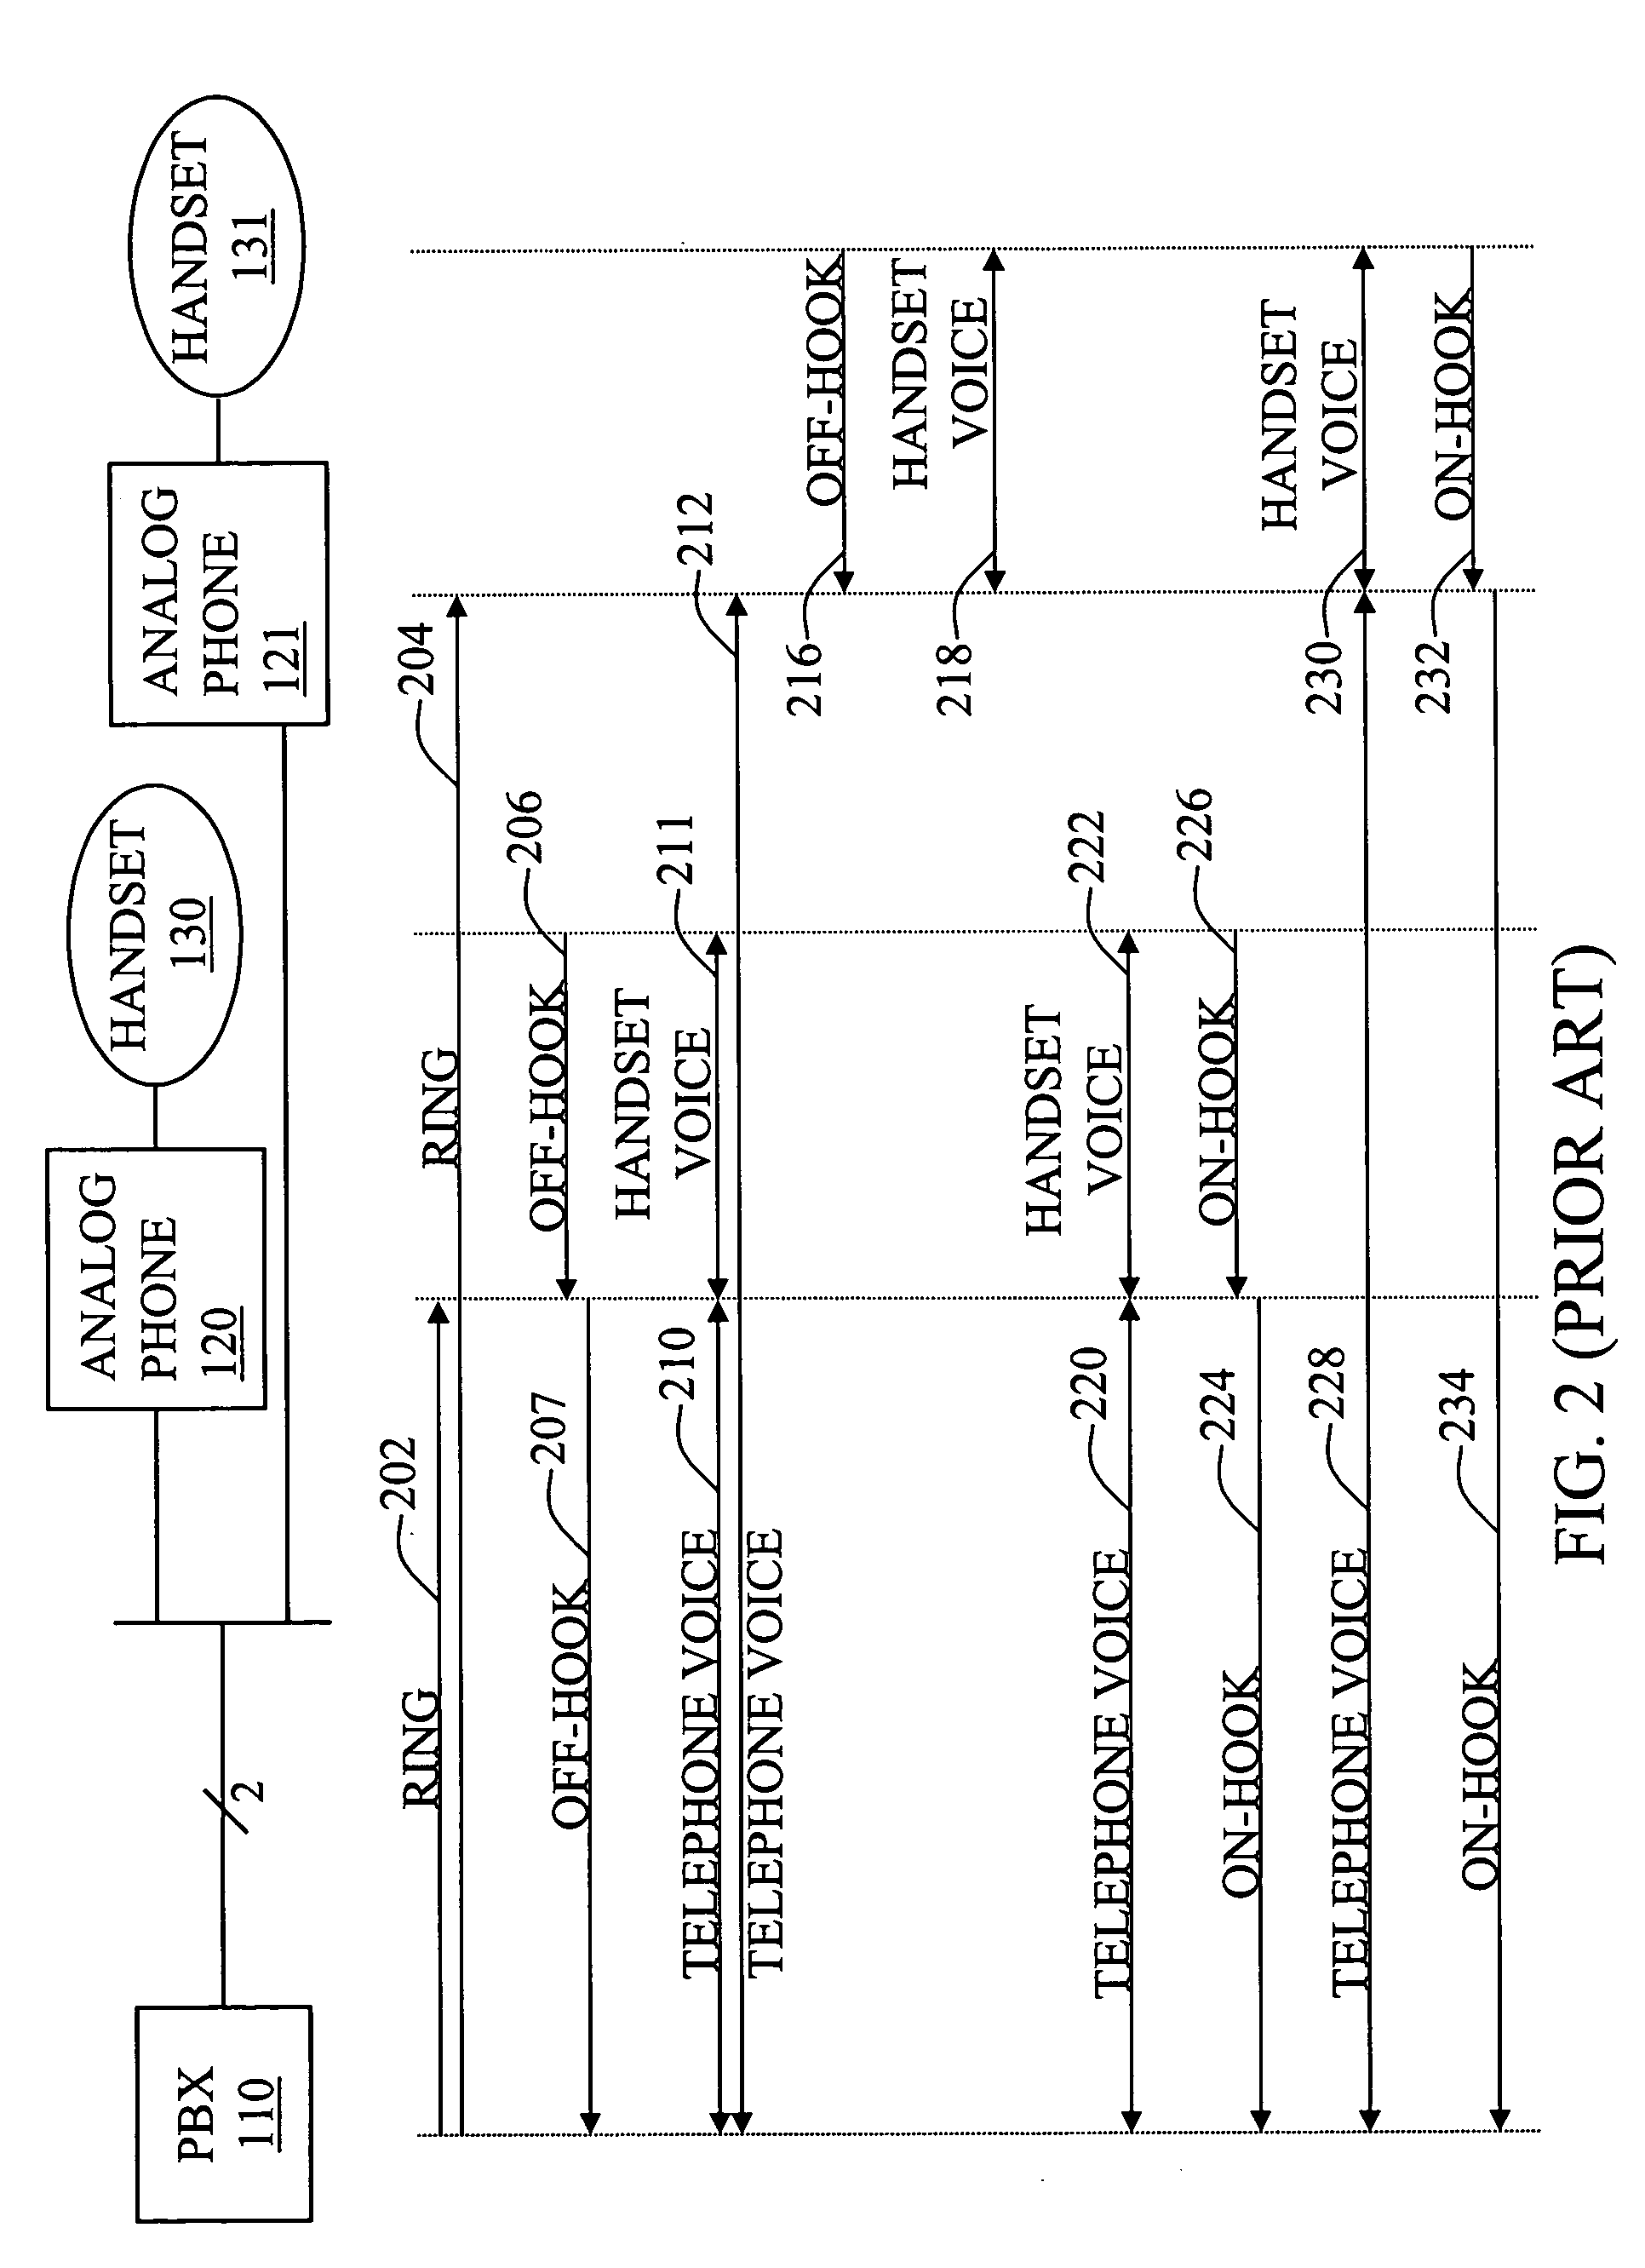 Methods and devices for achieving parallel operation between IP and analog phones